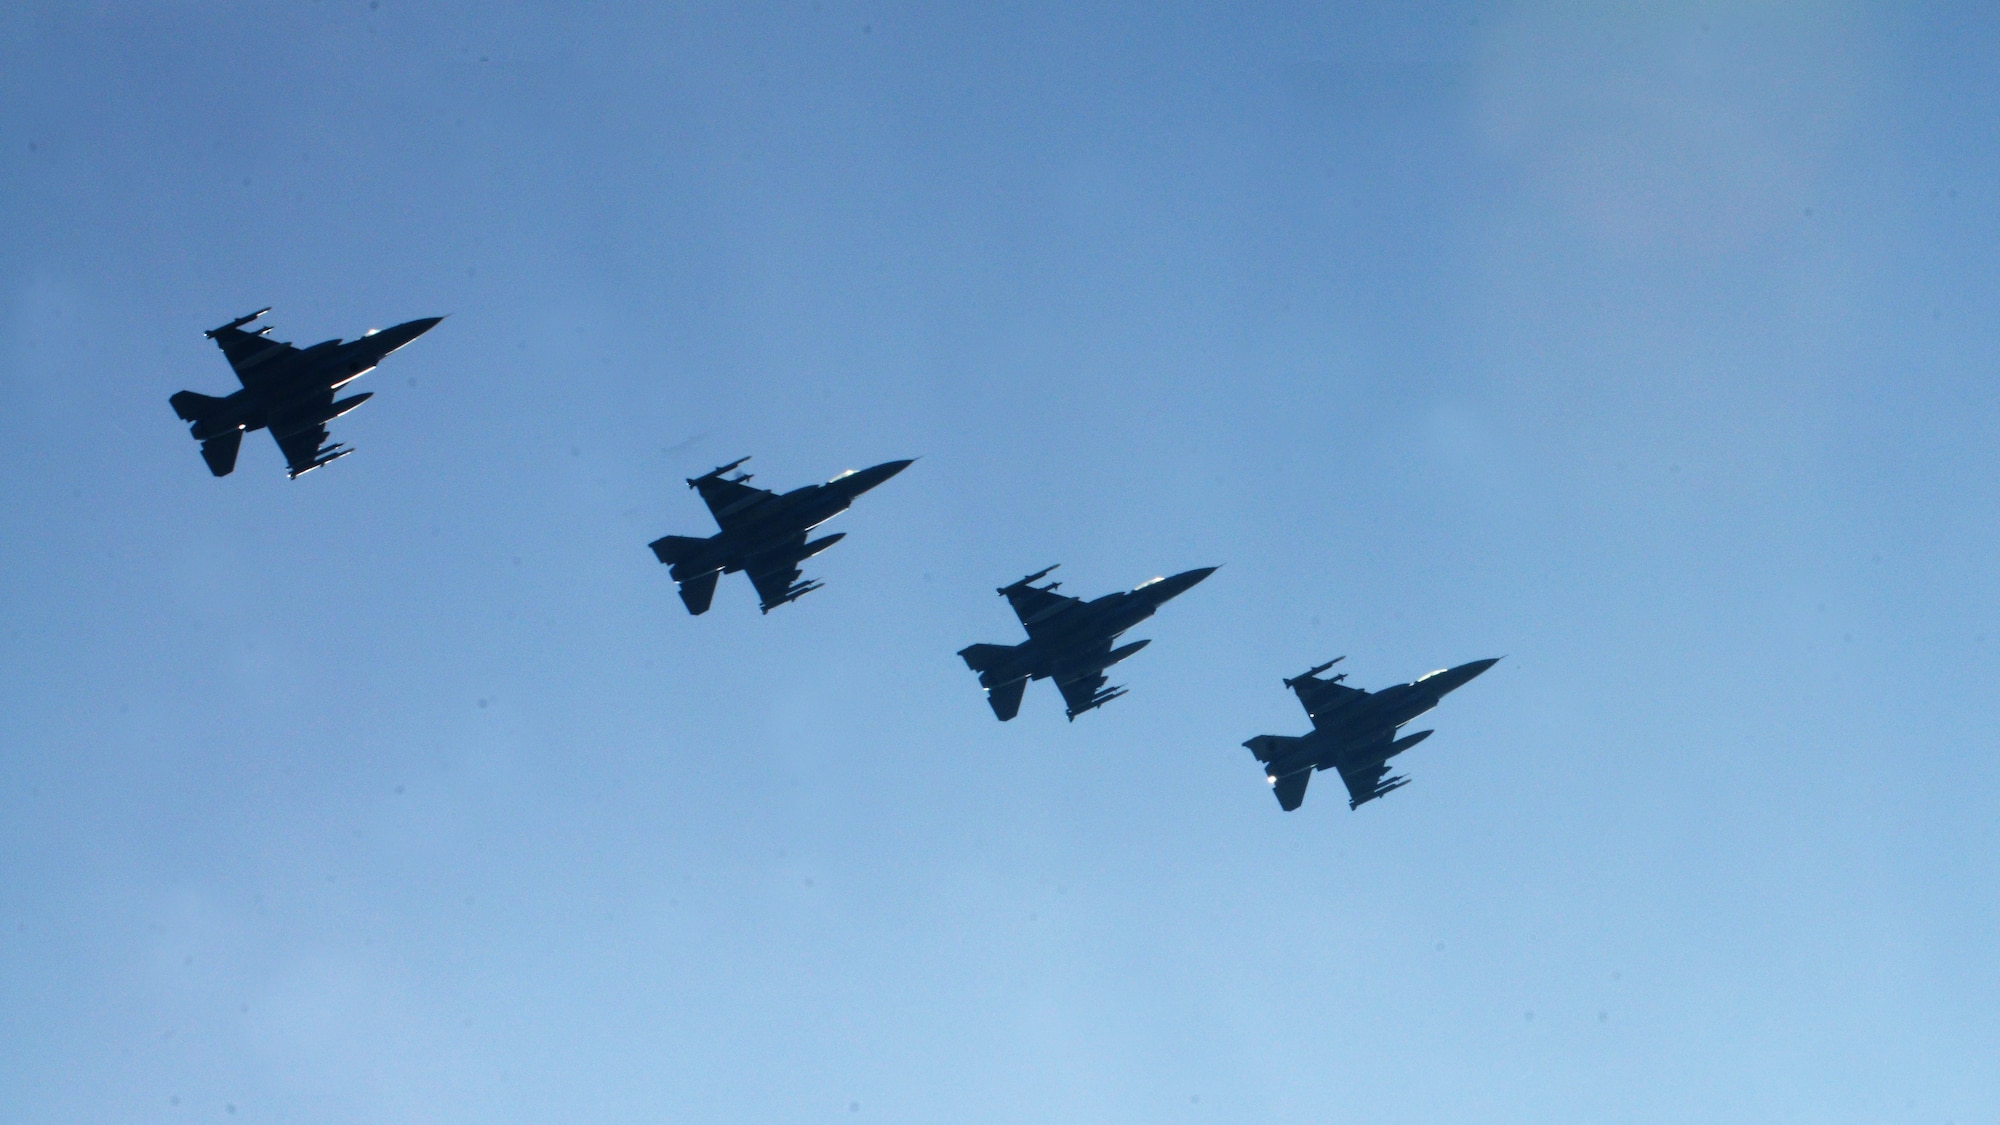 Four F-16 Fighting Falcons assigned to the 555th Fighter Squadron at Aviano Air Base, Italy, fly in formation prior to landing, March 14, 2014, at Lask Air Base, Poland. A total of twelve 555th Fighter Squadron F-16 Fighting Falcons and 200 military personnel arrived to augment an off-site training event, which demonstrates an enduring partnership with NATO allies. (U.S. Air Force photo/Airman 1st Class Ryan Conroy) 
